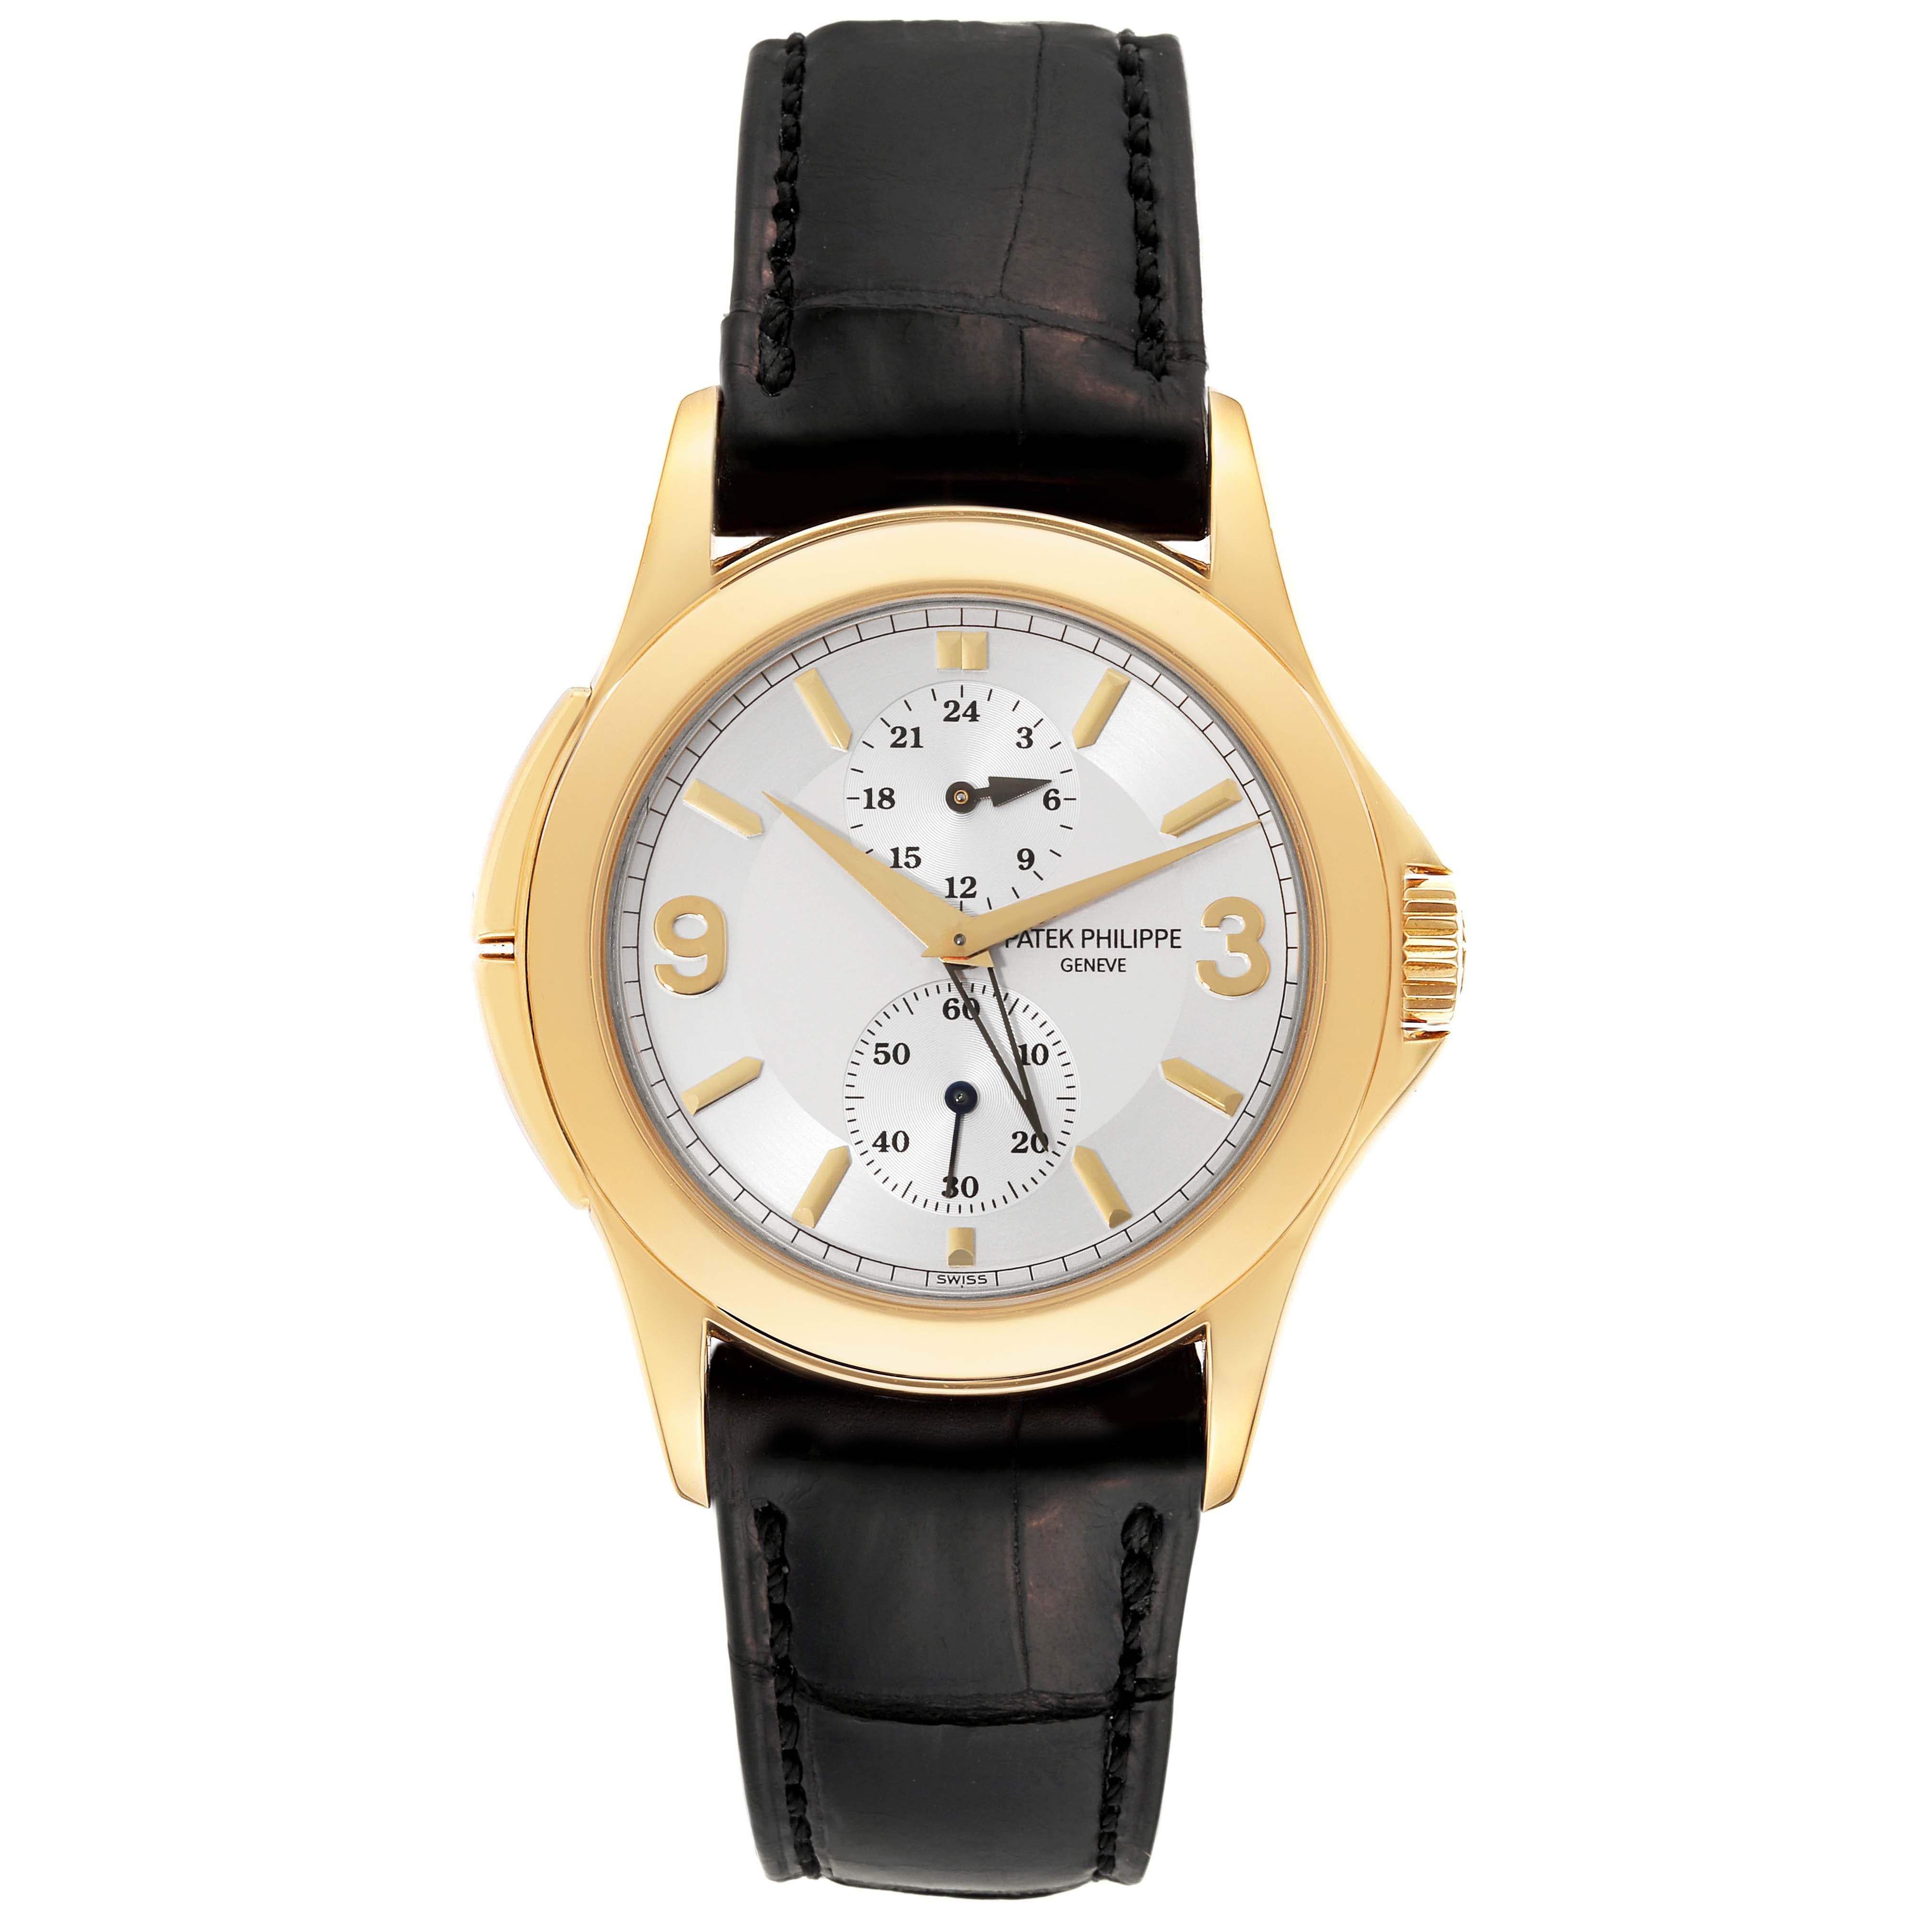 Patek Philippe Calatrava Travel Time Yellow Gold Mens Watch 5134. Manual winding movement. 18k yellow gold case 37.0 mm in diameter. Crown with protective shoulders, pusher at 10 and 8 o'clock to change time zone. Screw-down transparent exhibition